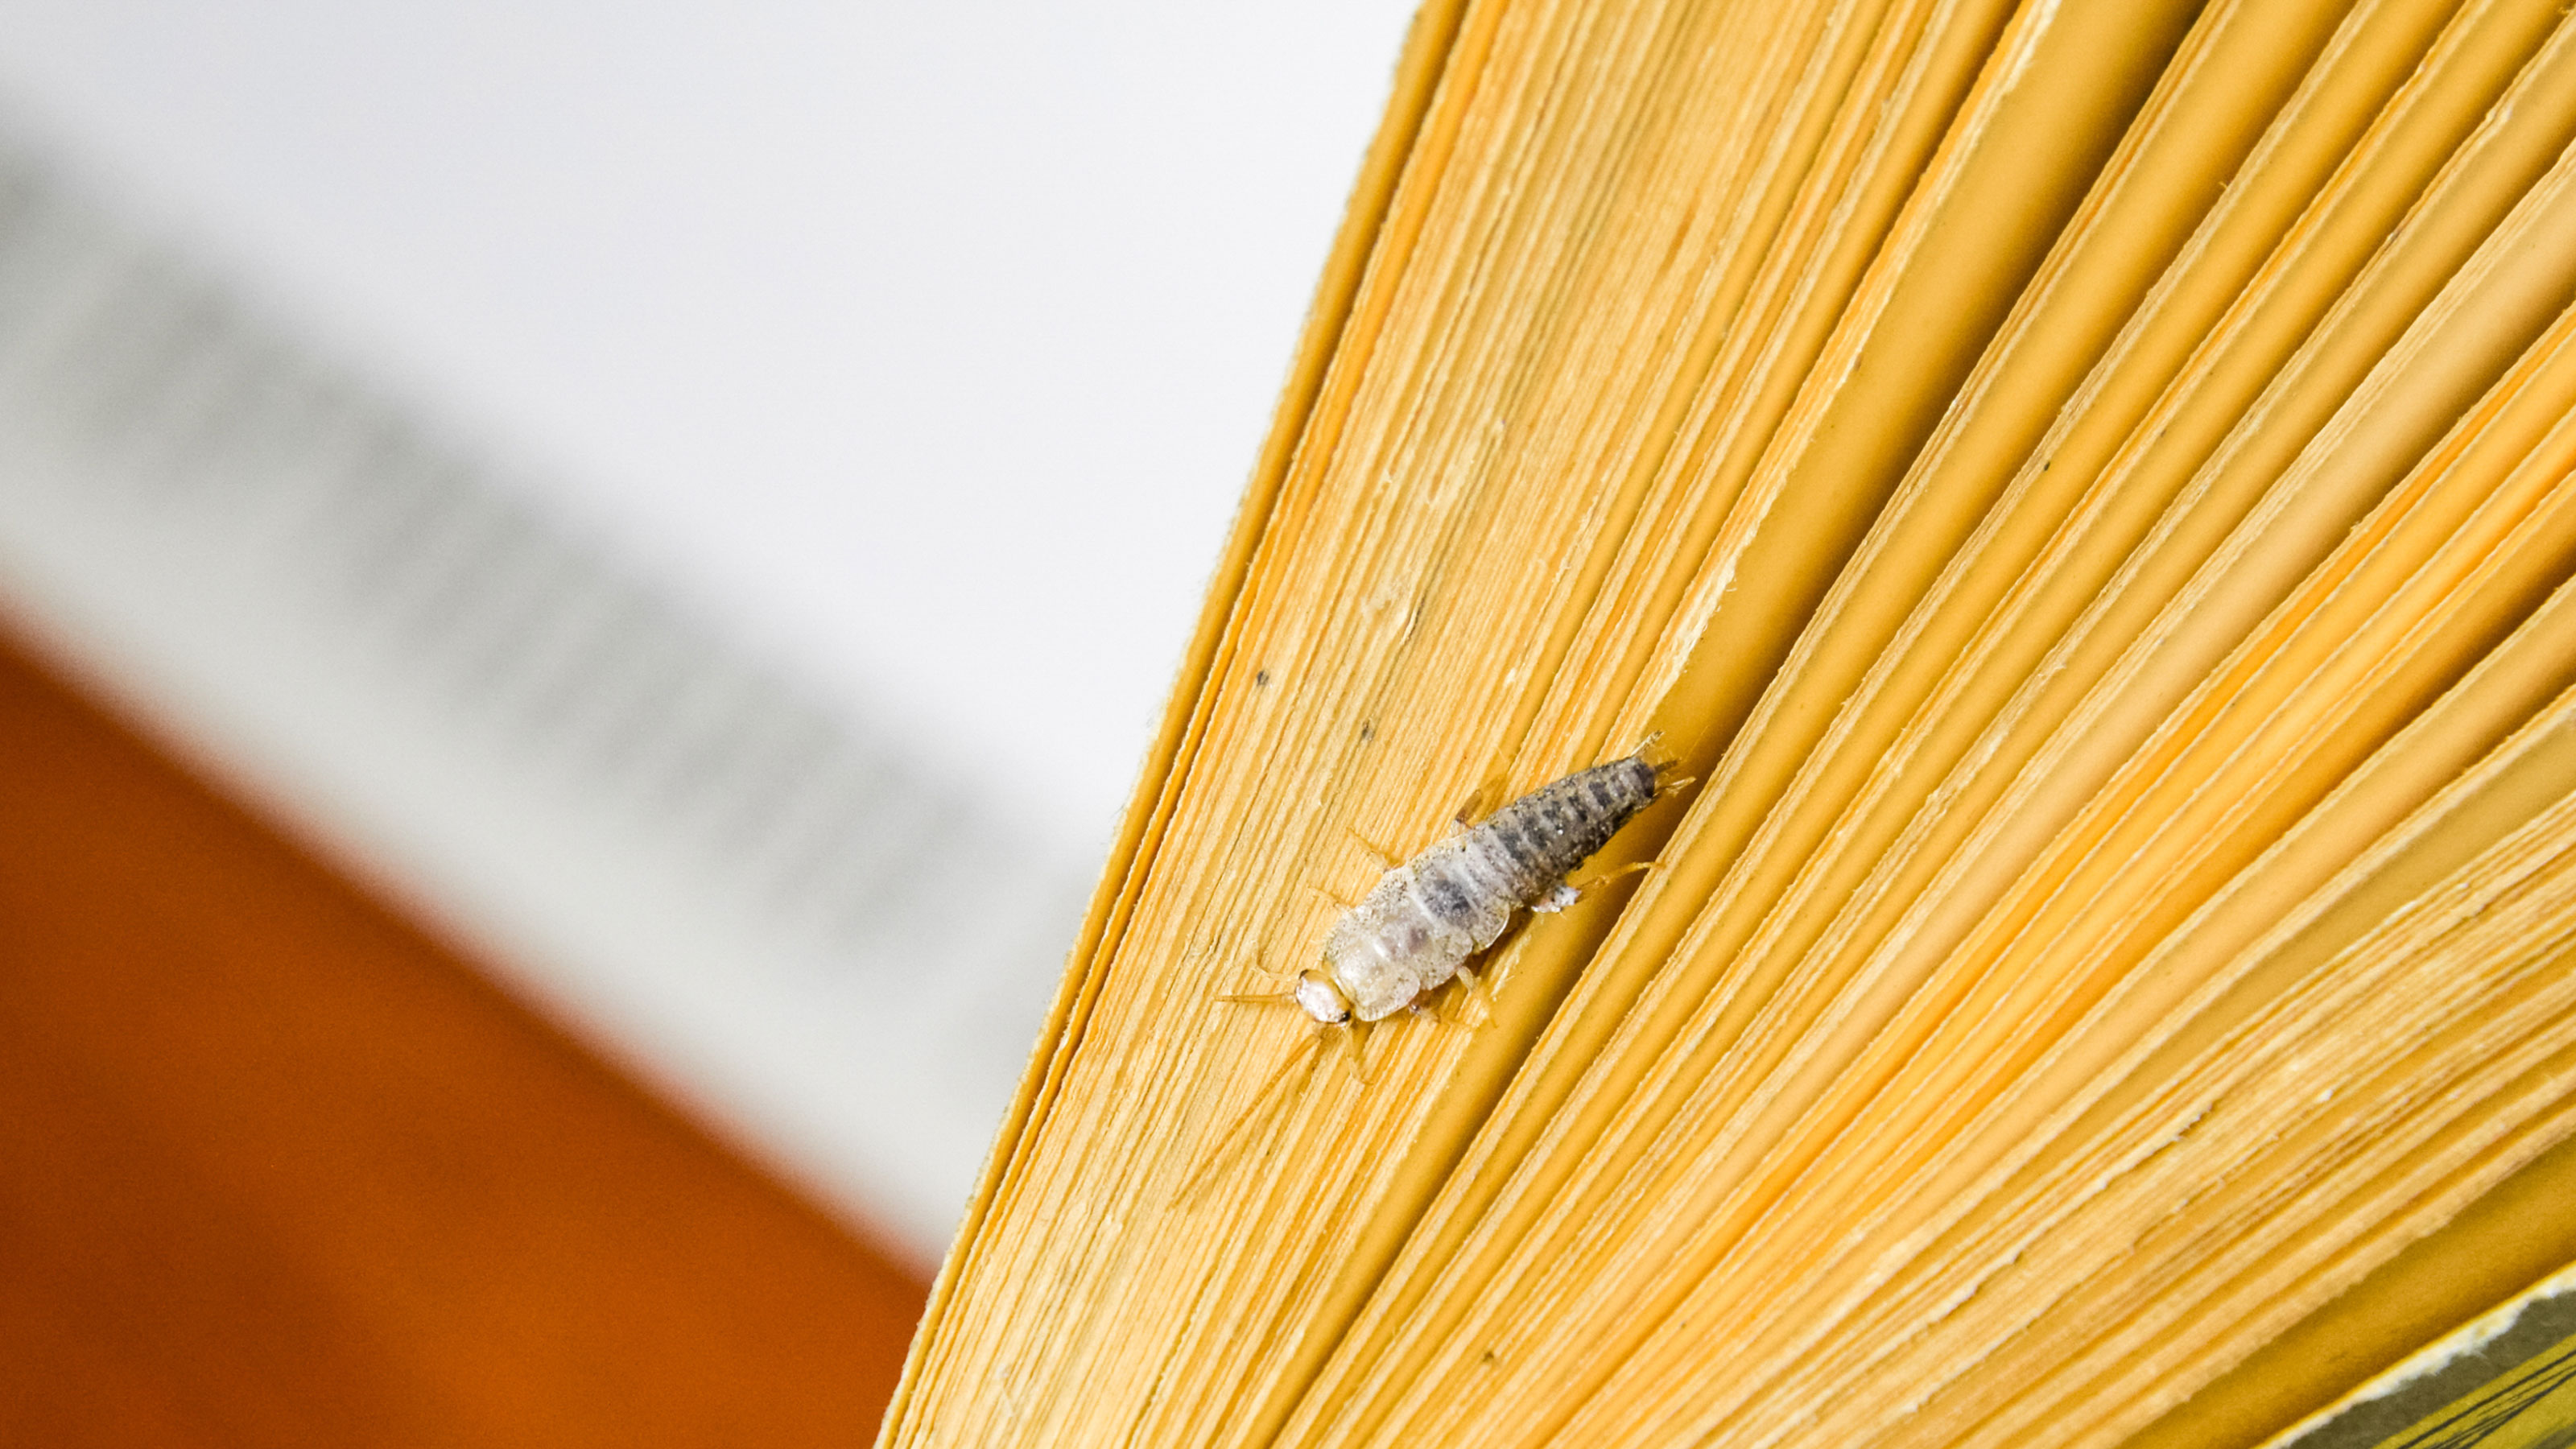 How to Get Rid of Silverfish Quickly with Natural Traps and Tips